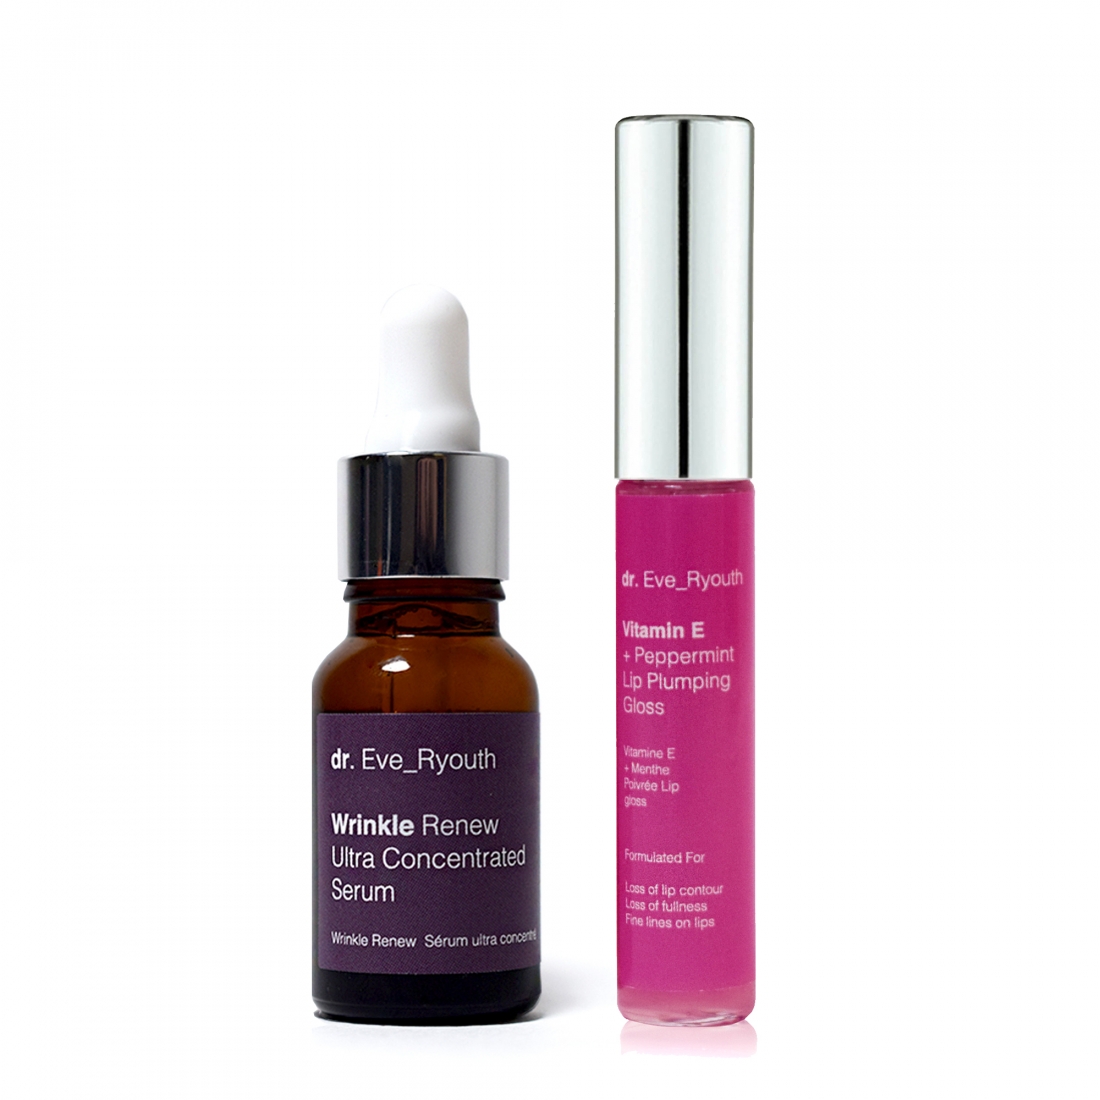 'Wrinkle Renew + Vitamin E and Peppermint' Anti-Aging Serum, Lip Plumper - 2 Pieces